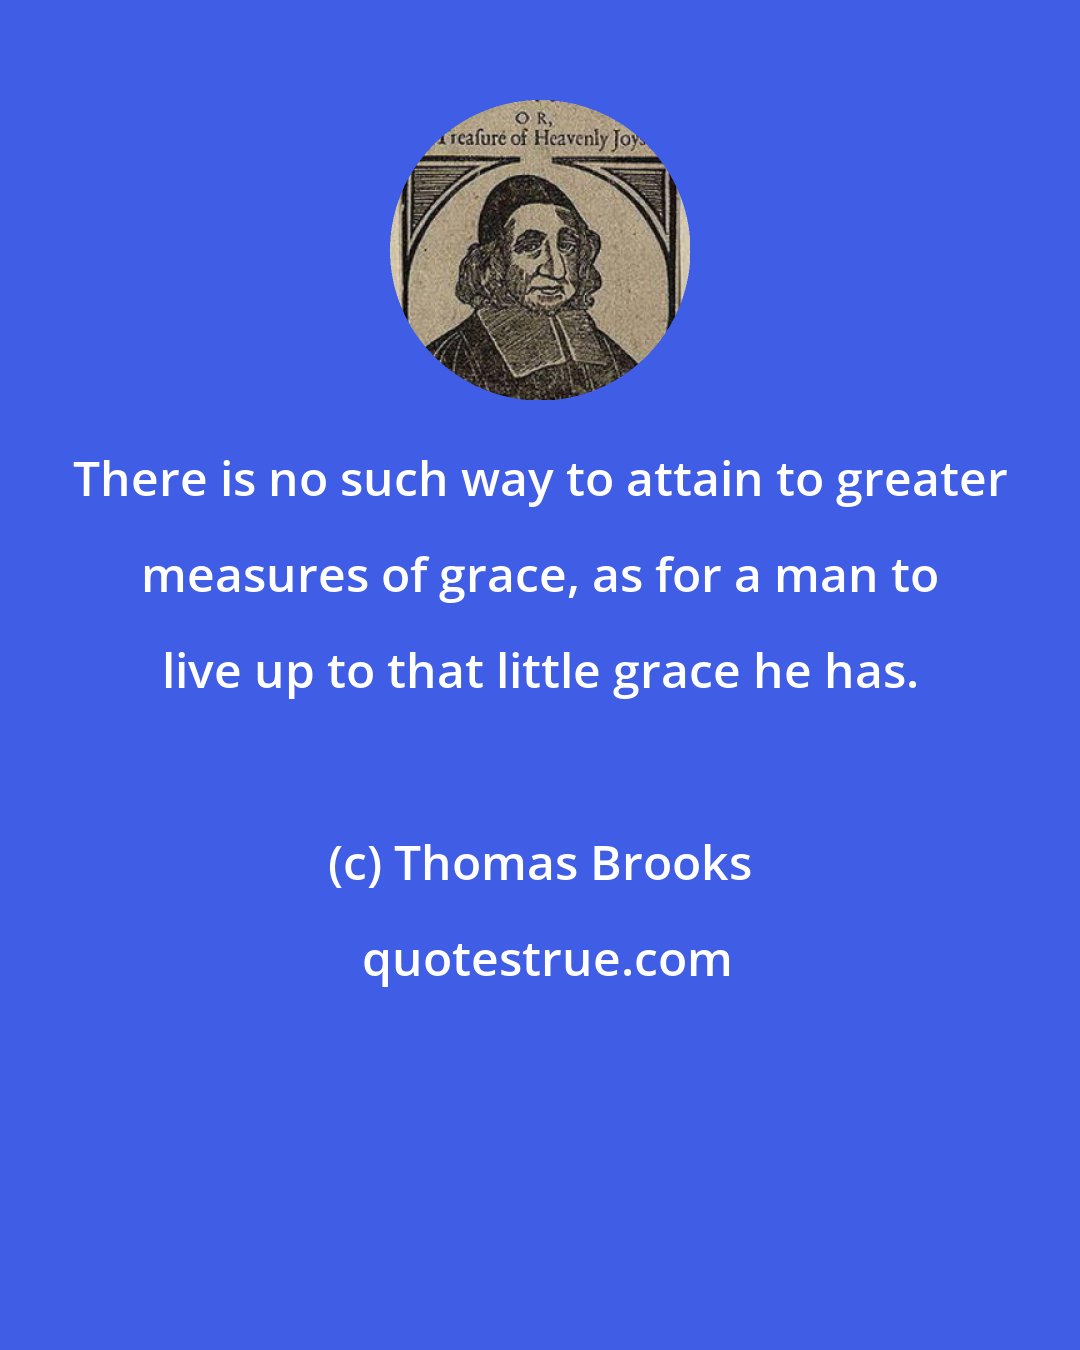 Thomas Brooks: There is no such way to attain to greater measures of grace, as for a man to live up to that little grace he has.